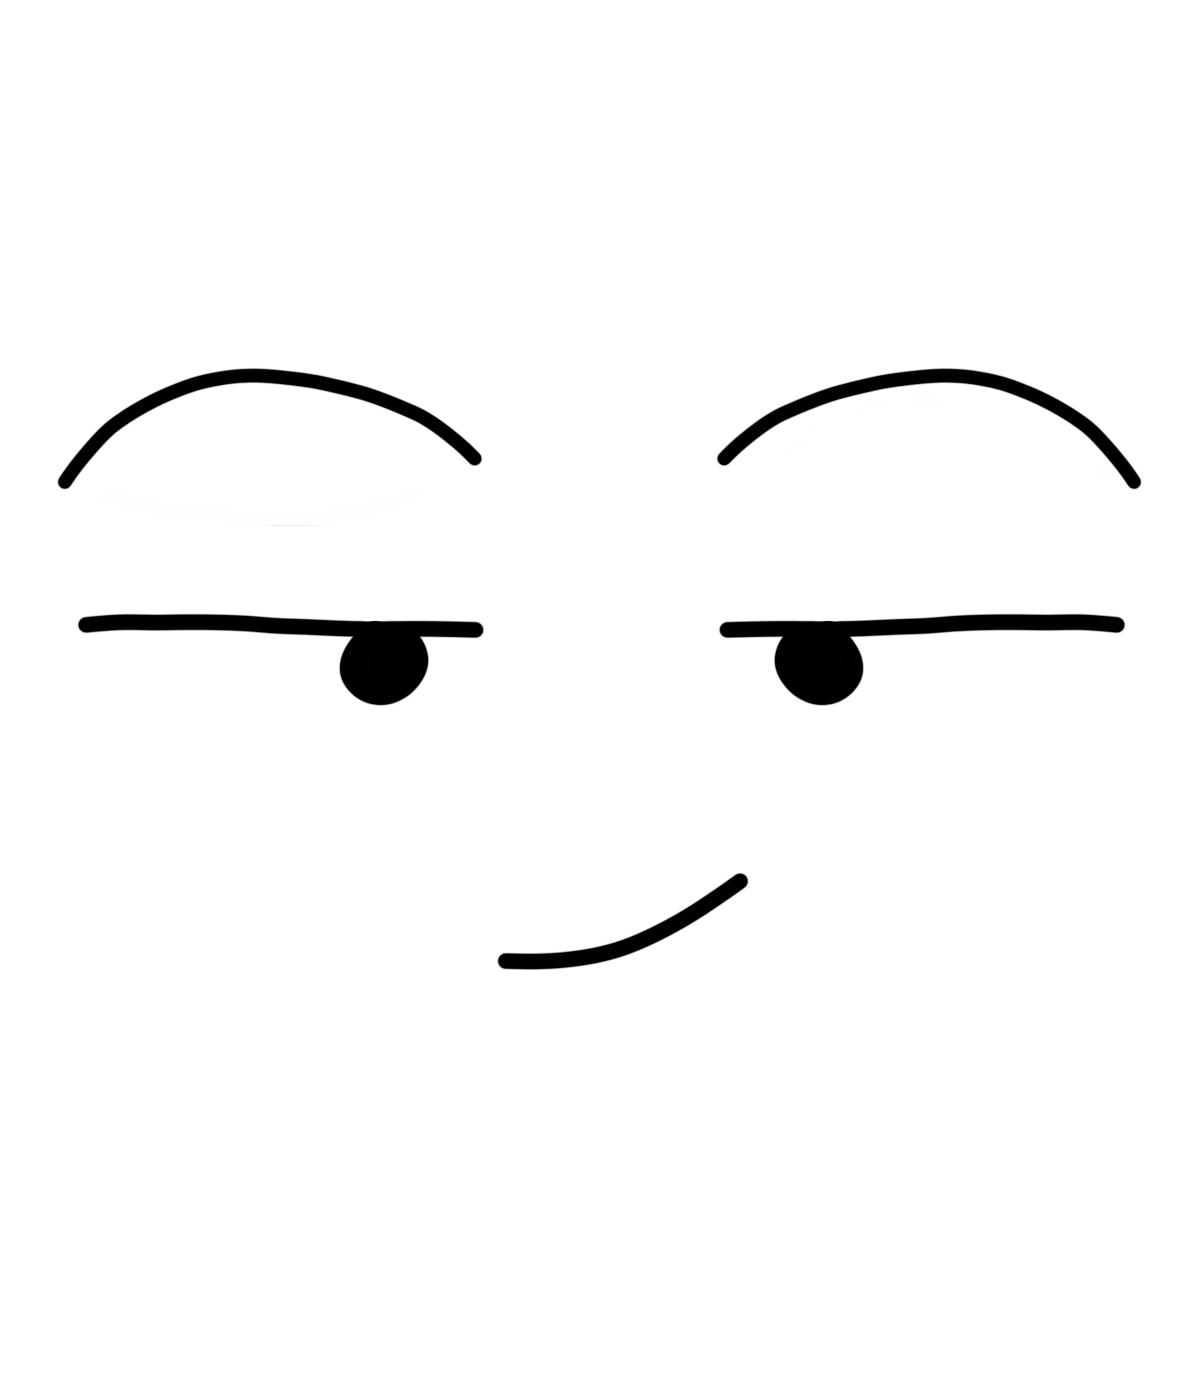 laziness potatoes face PNG by Donatoinklinggamer on DeviantArt